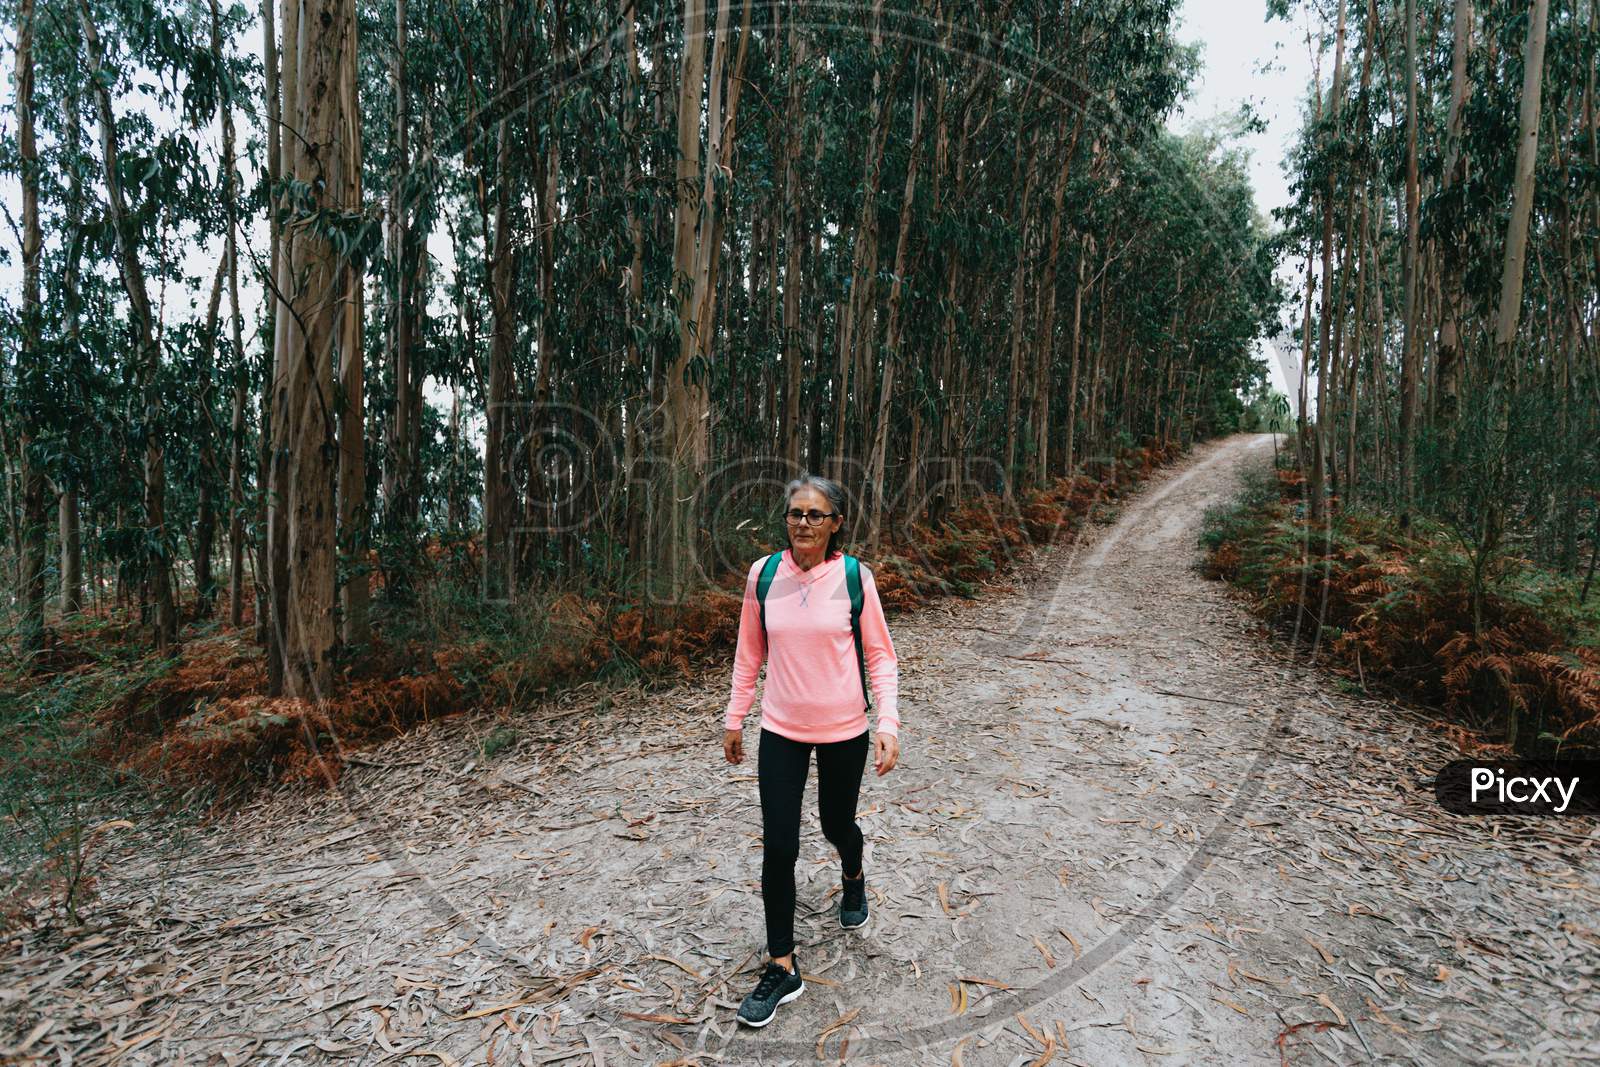 Old Woman Walking In The Forest With Sport Clothes, Bag And Glasses While Smiling